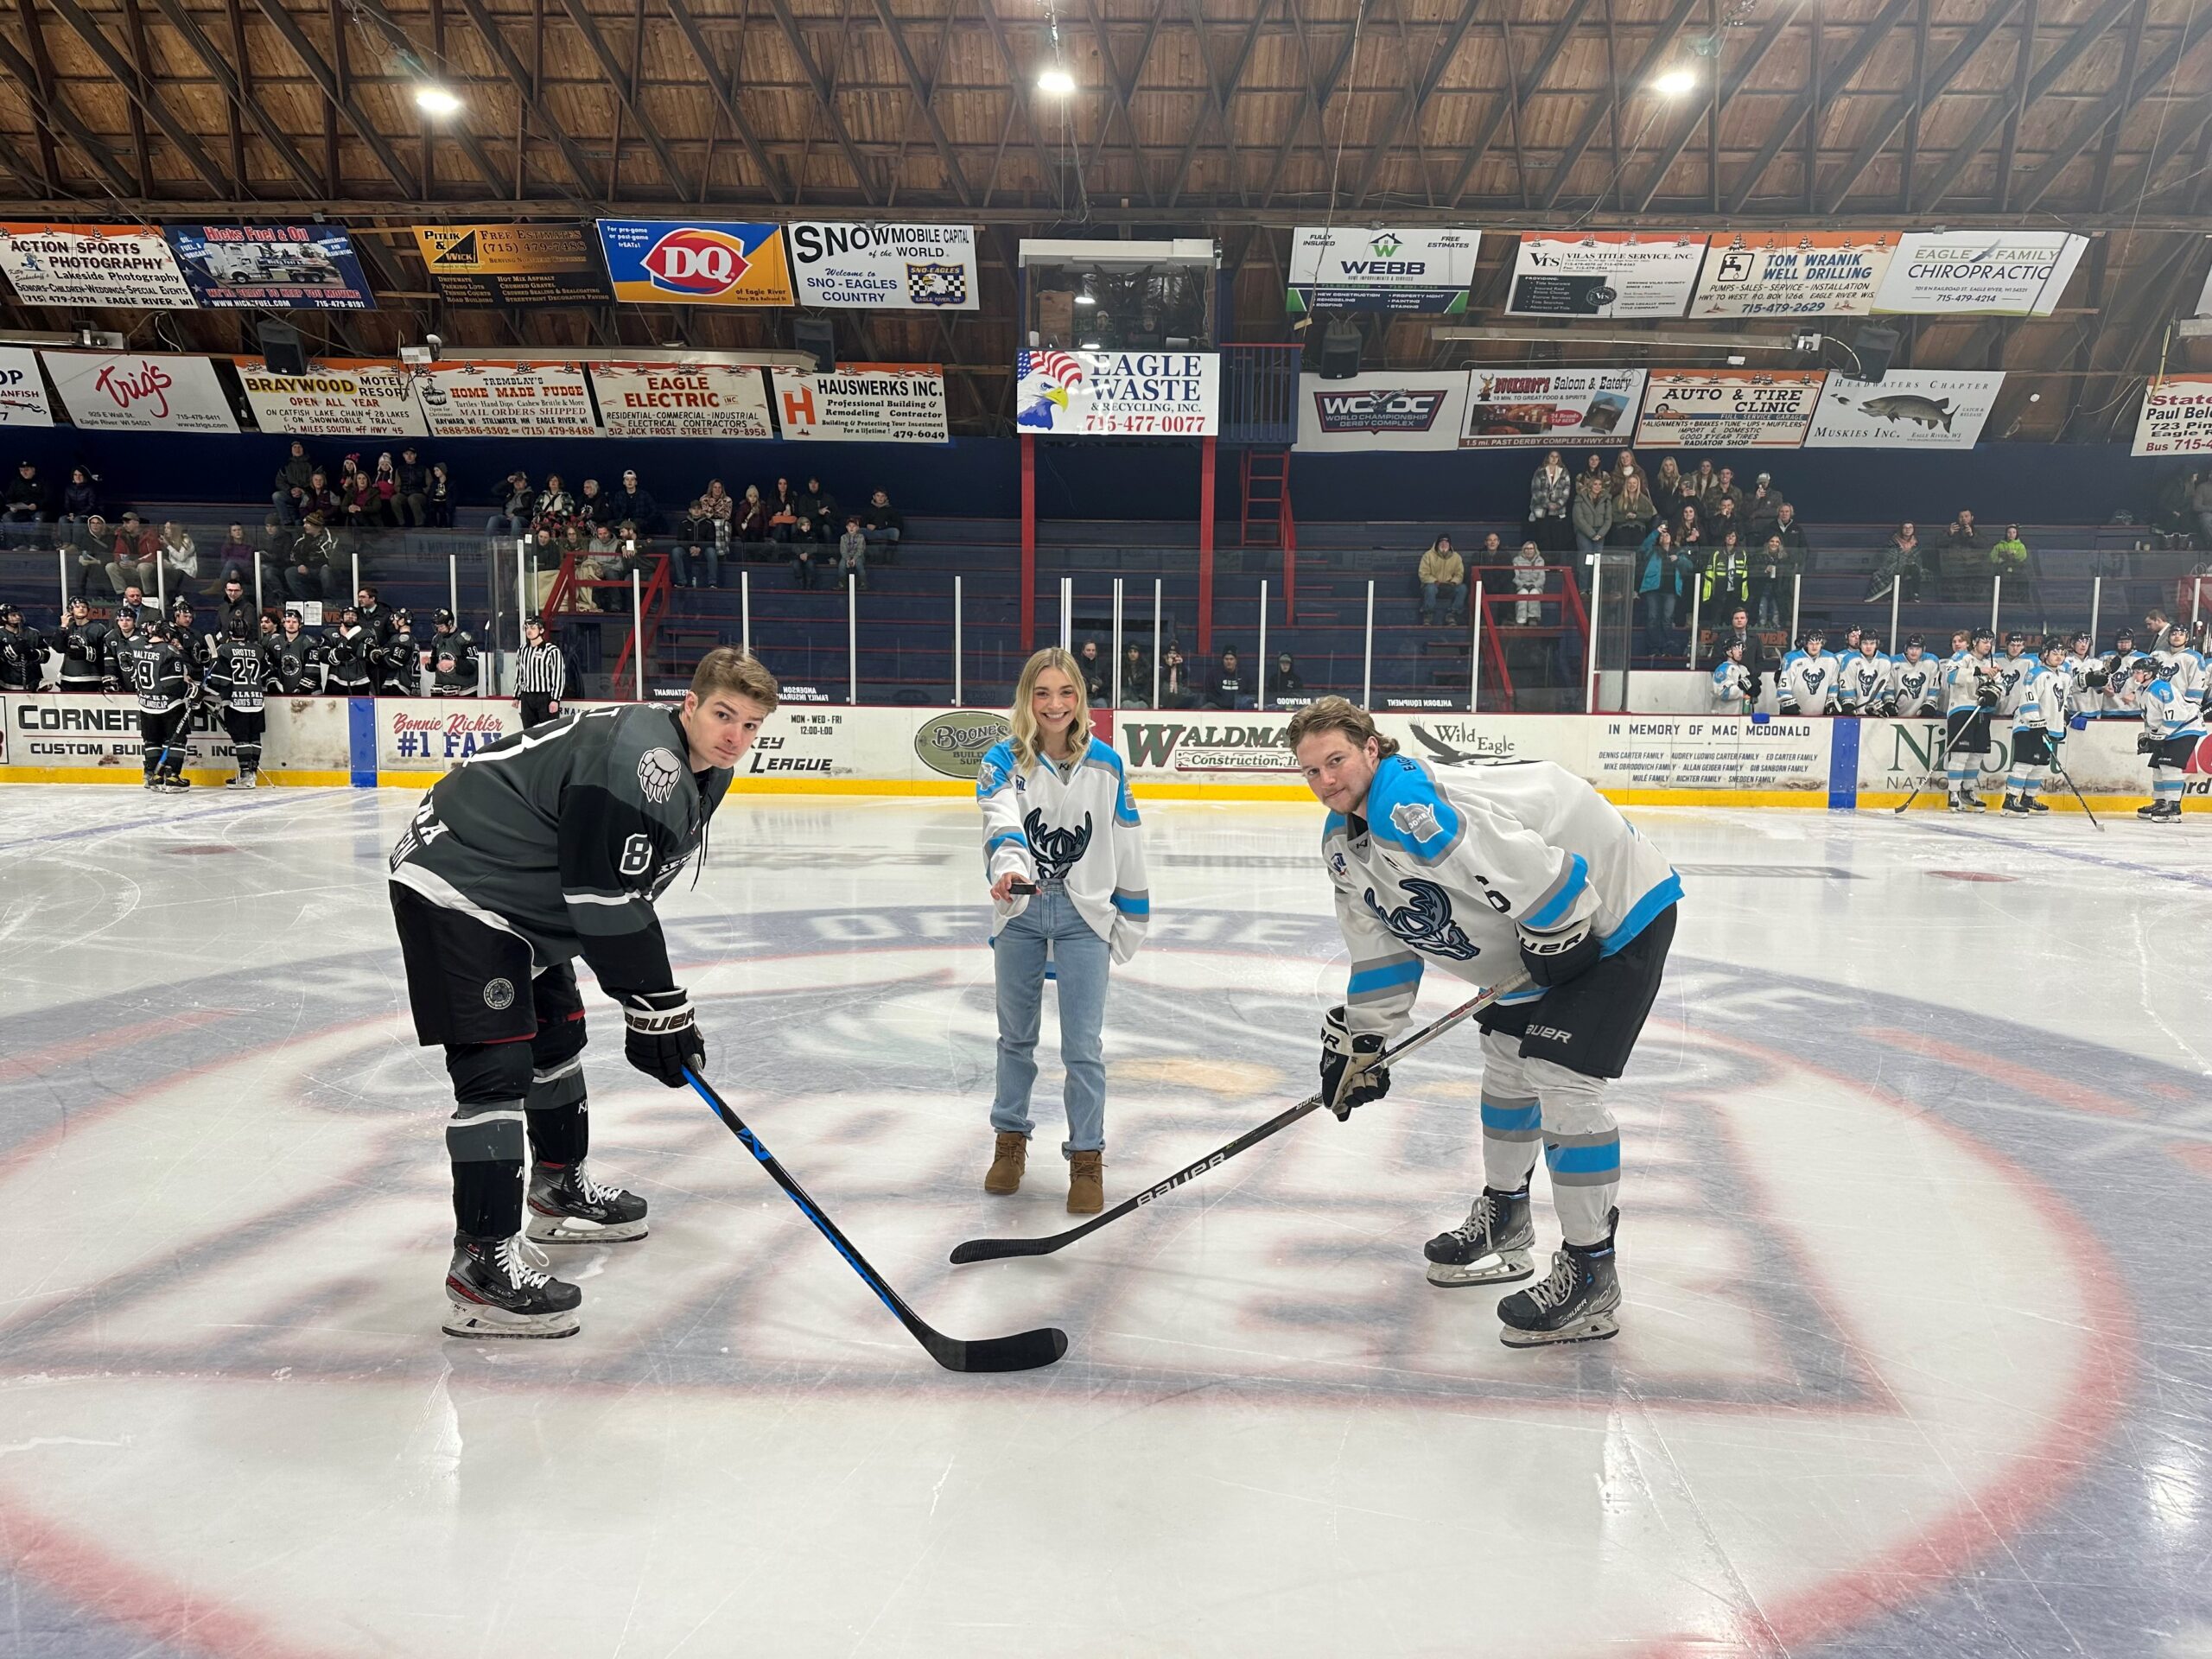 NASCAR driver Natalie Decker performs the ceremonial puck drop on New Year's Eve